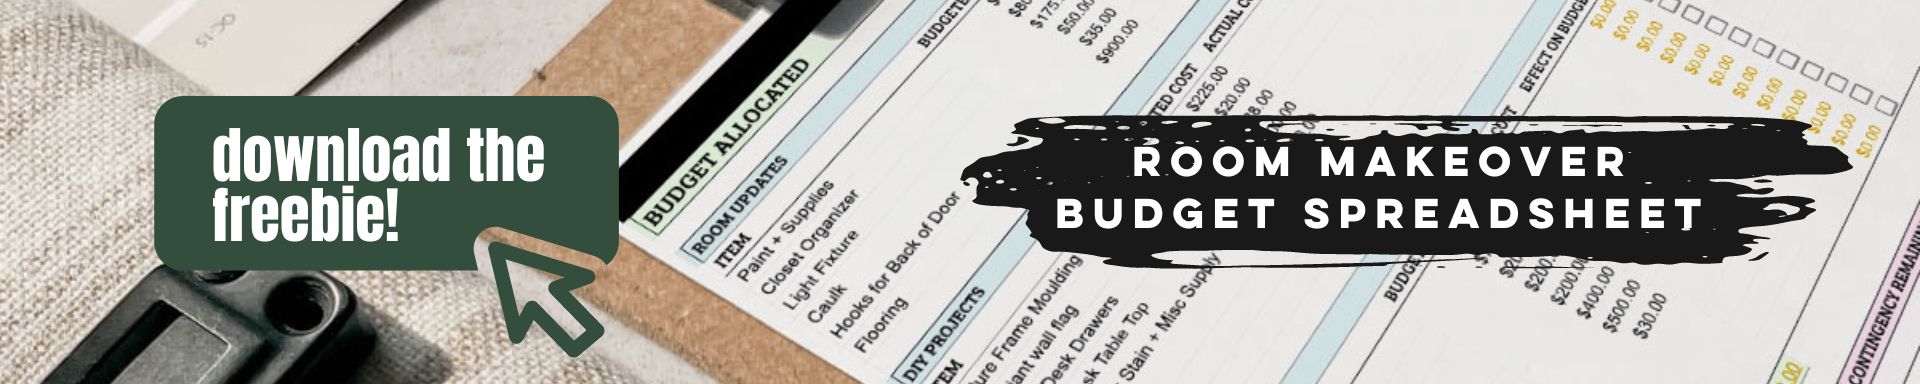 a diy room makeover budgeting spreadsheet